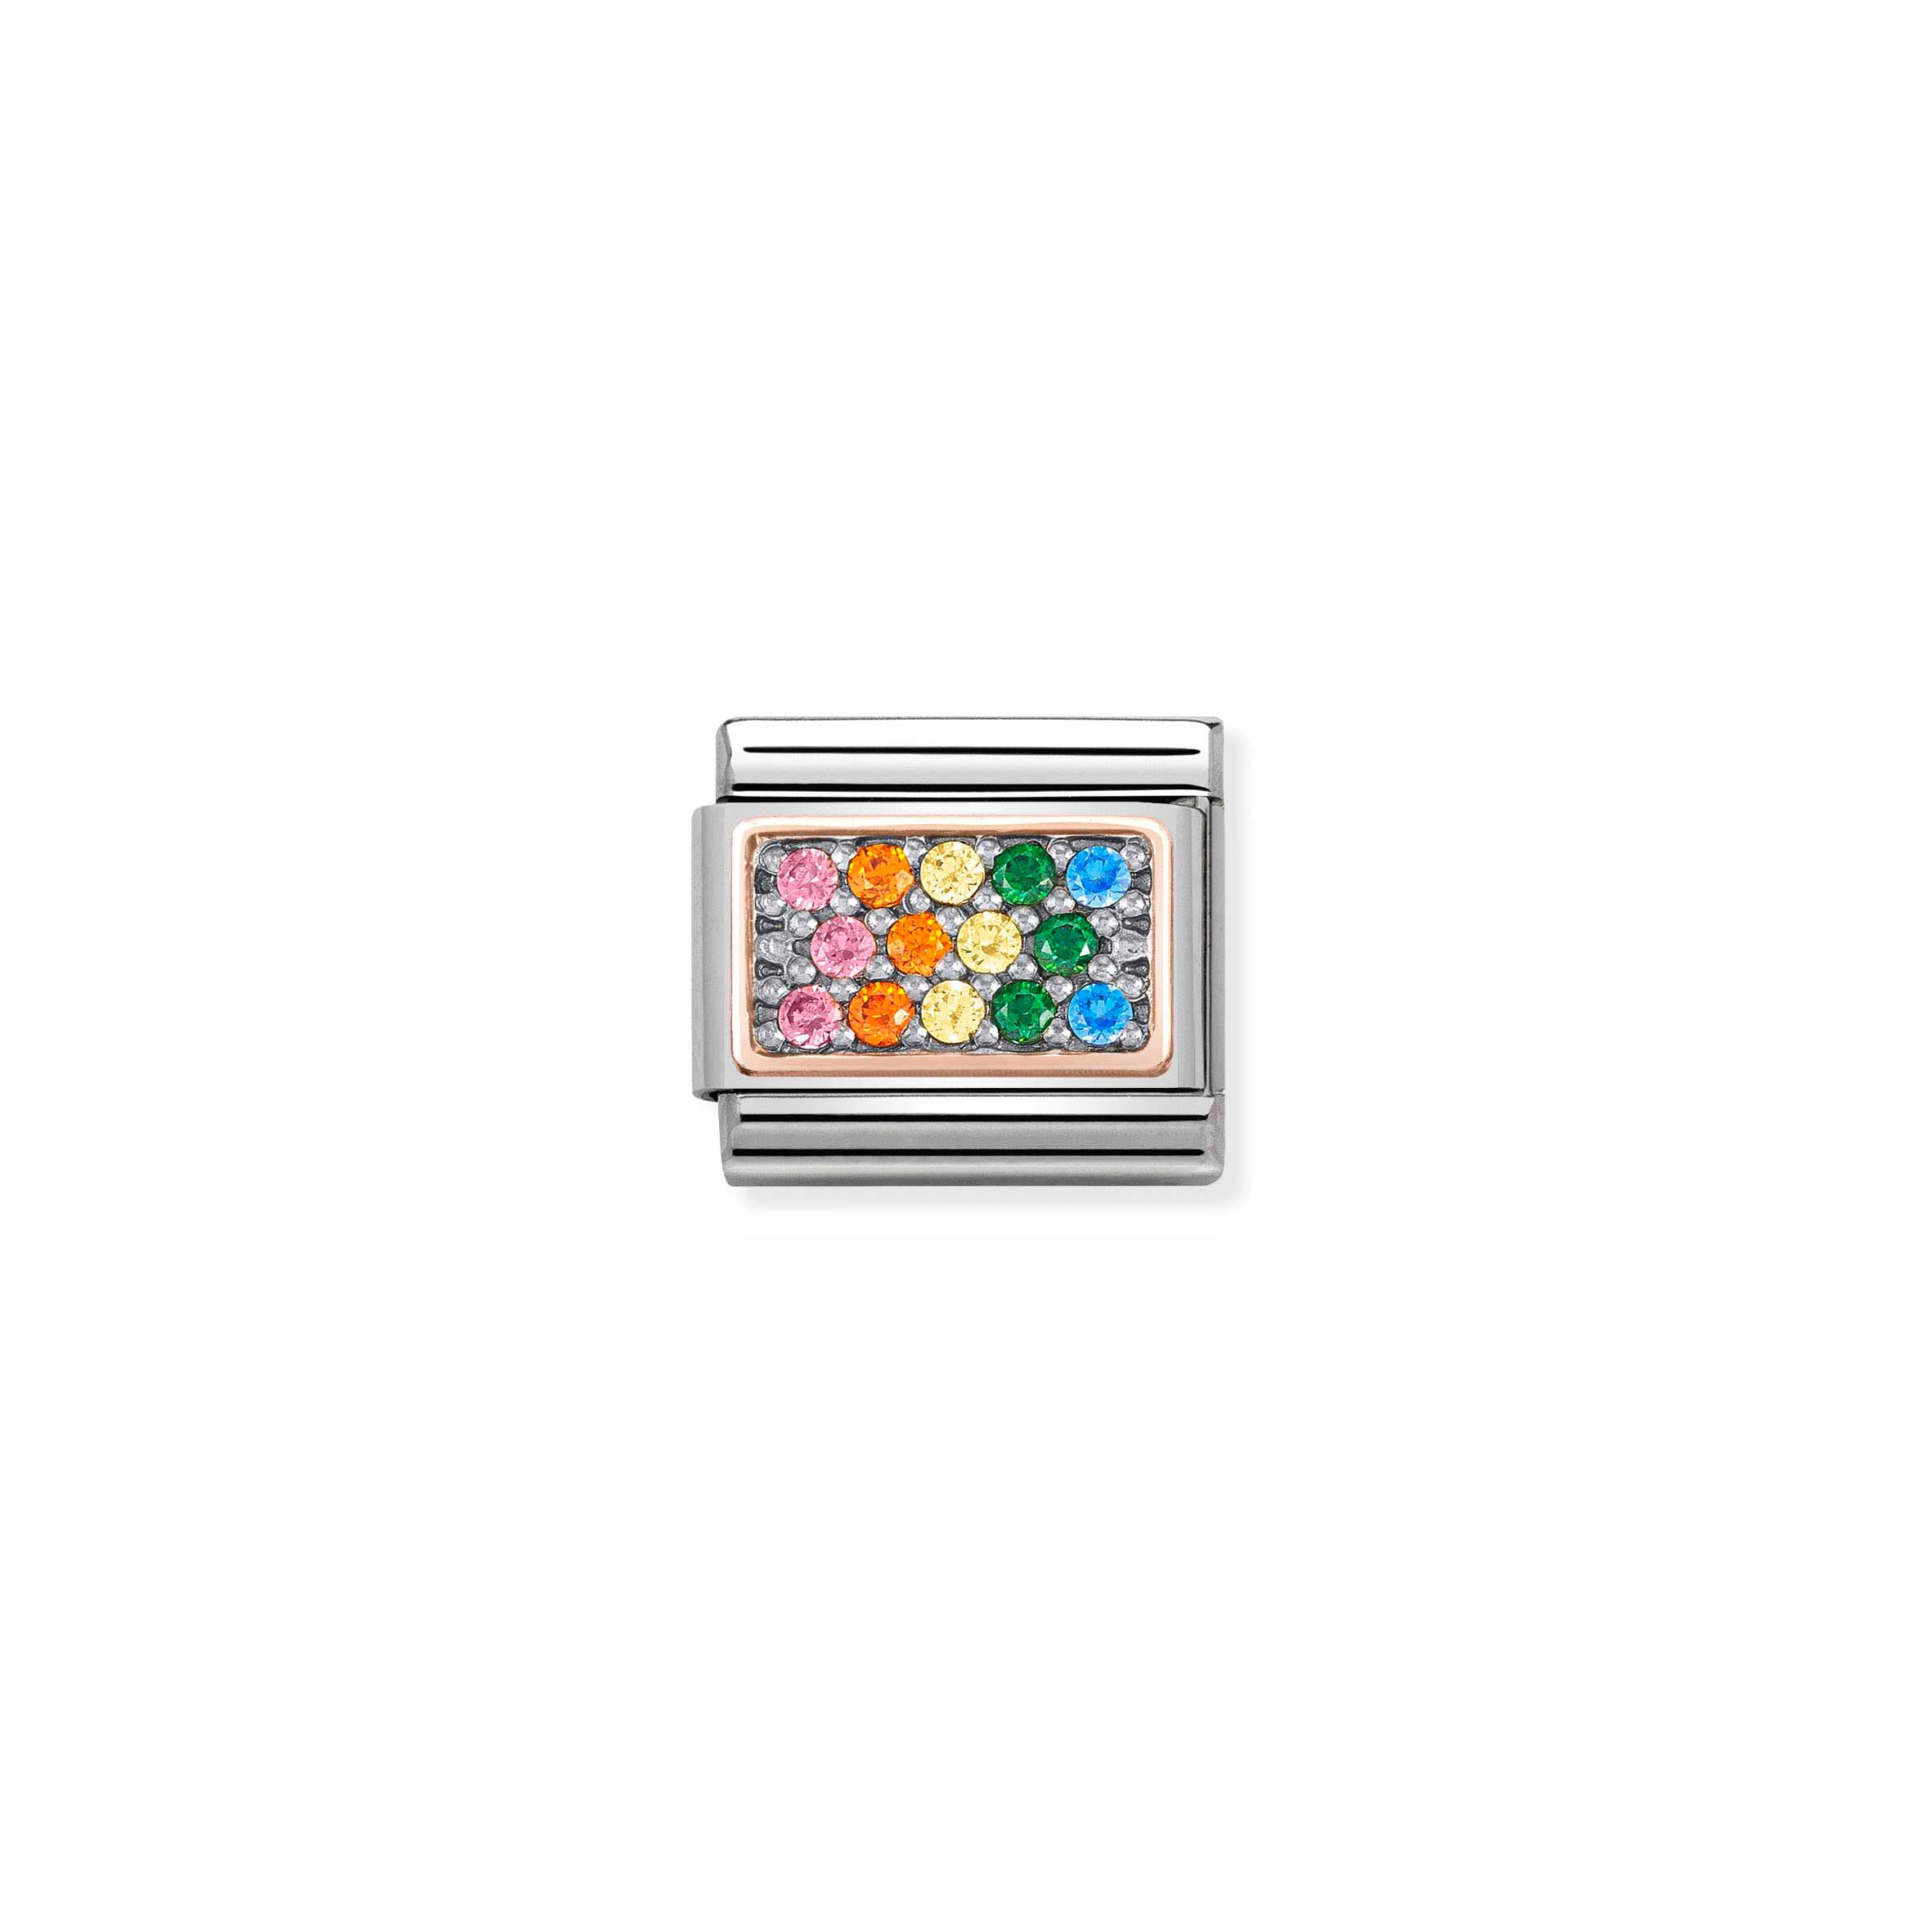 NOMINATION - Composable Classic PAVE 2 Finishes st/steel, zircon & gold 375 (Rainbow)